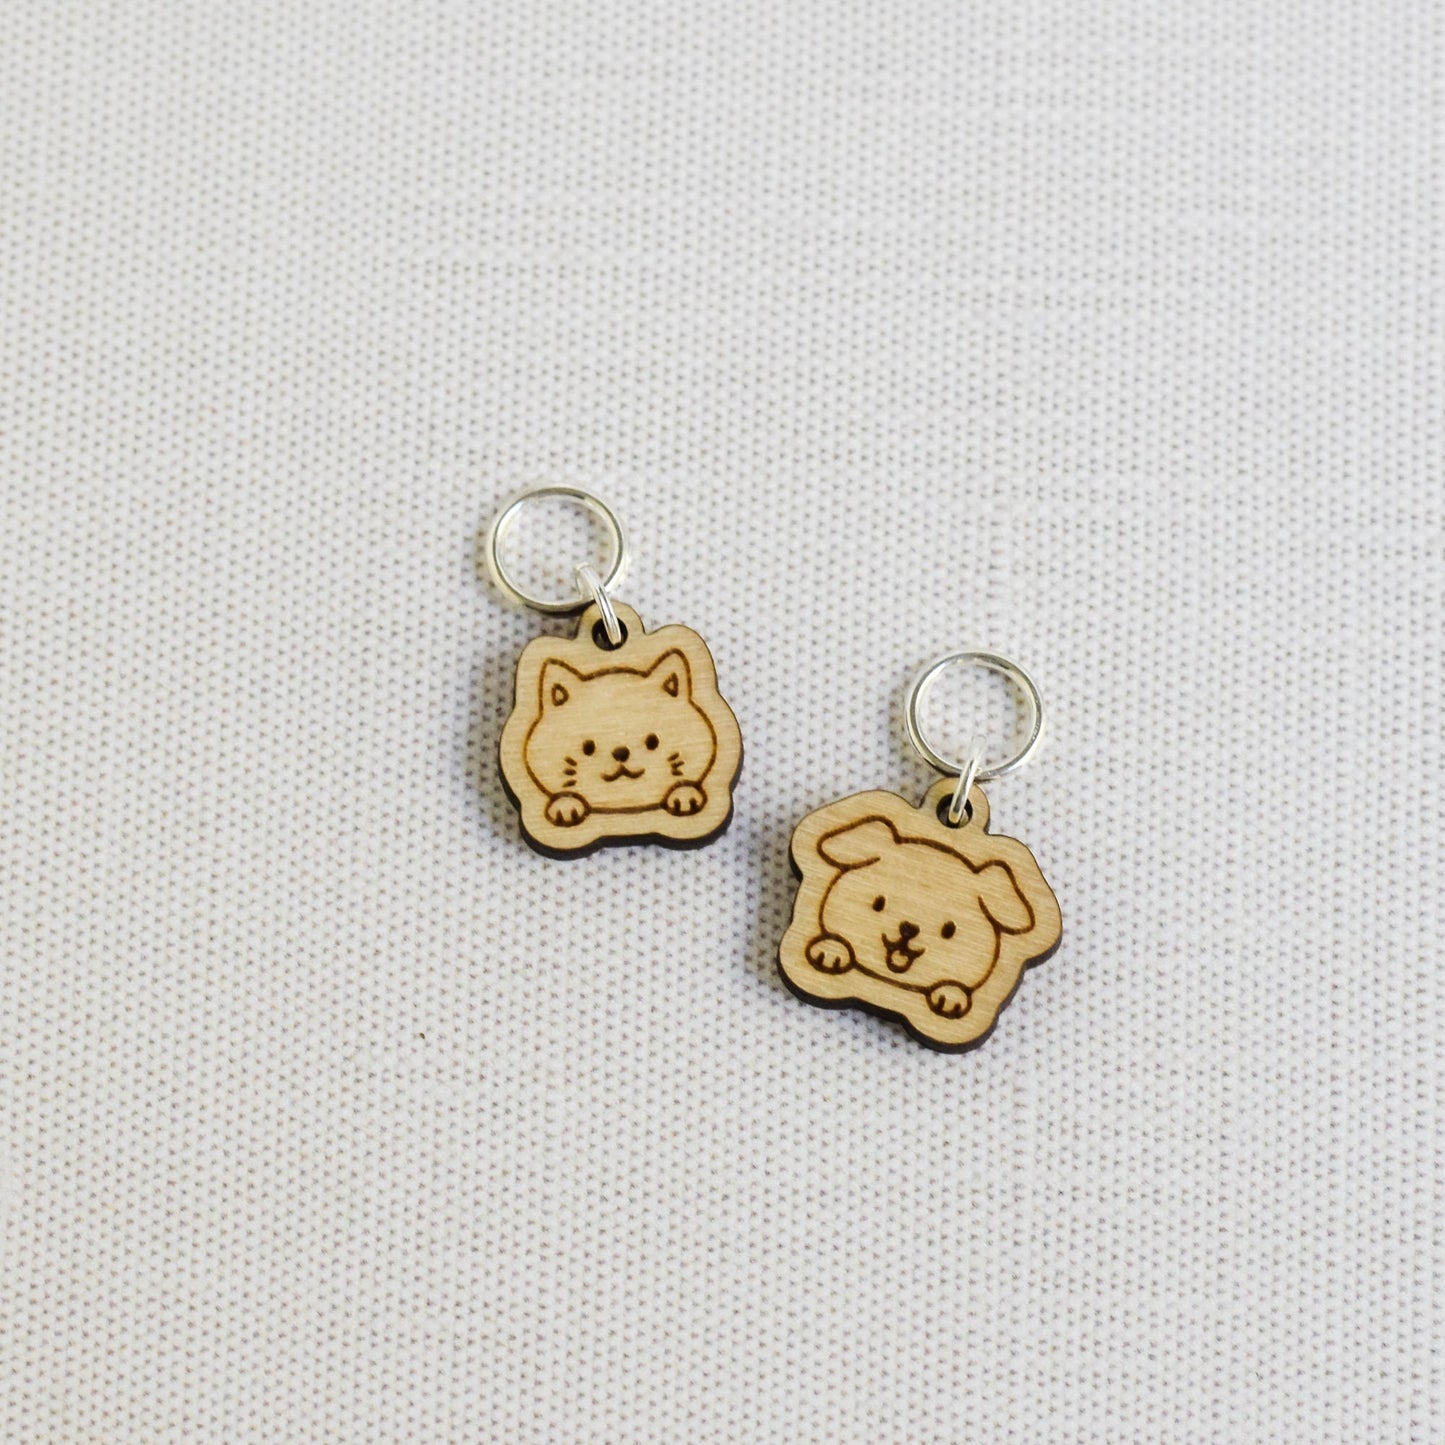 Set of 2 Laser Engraved Stitch Markers - Puppy and Kitten Faces